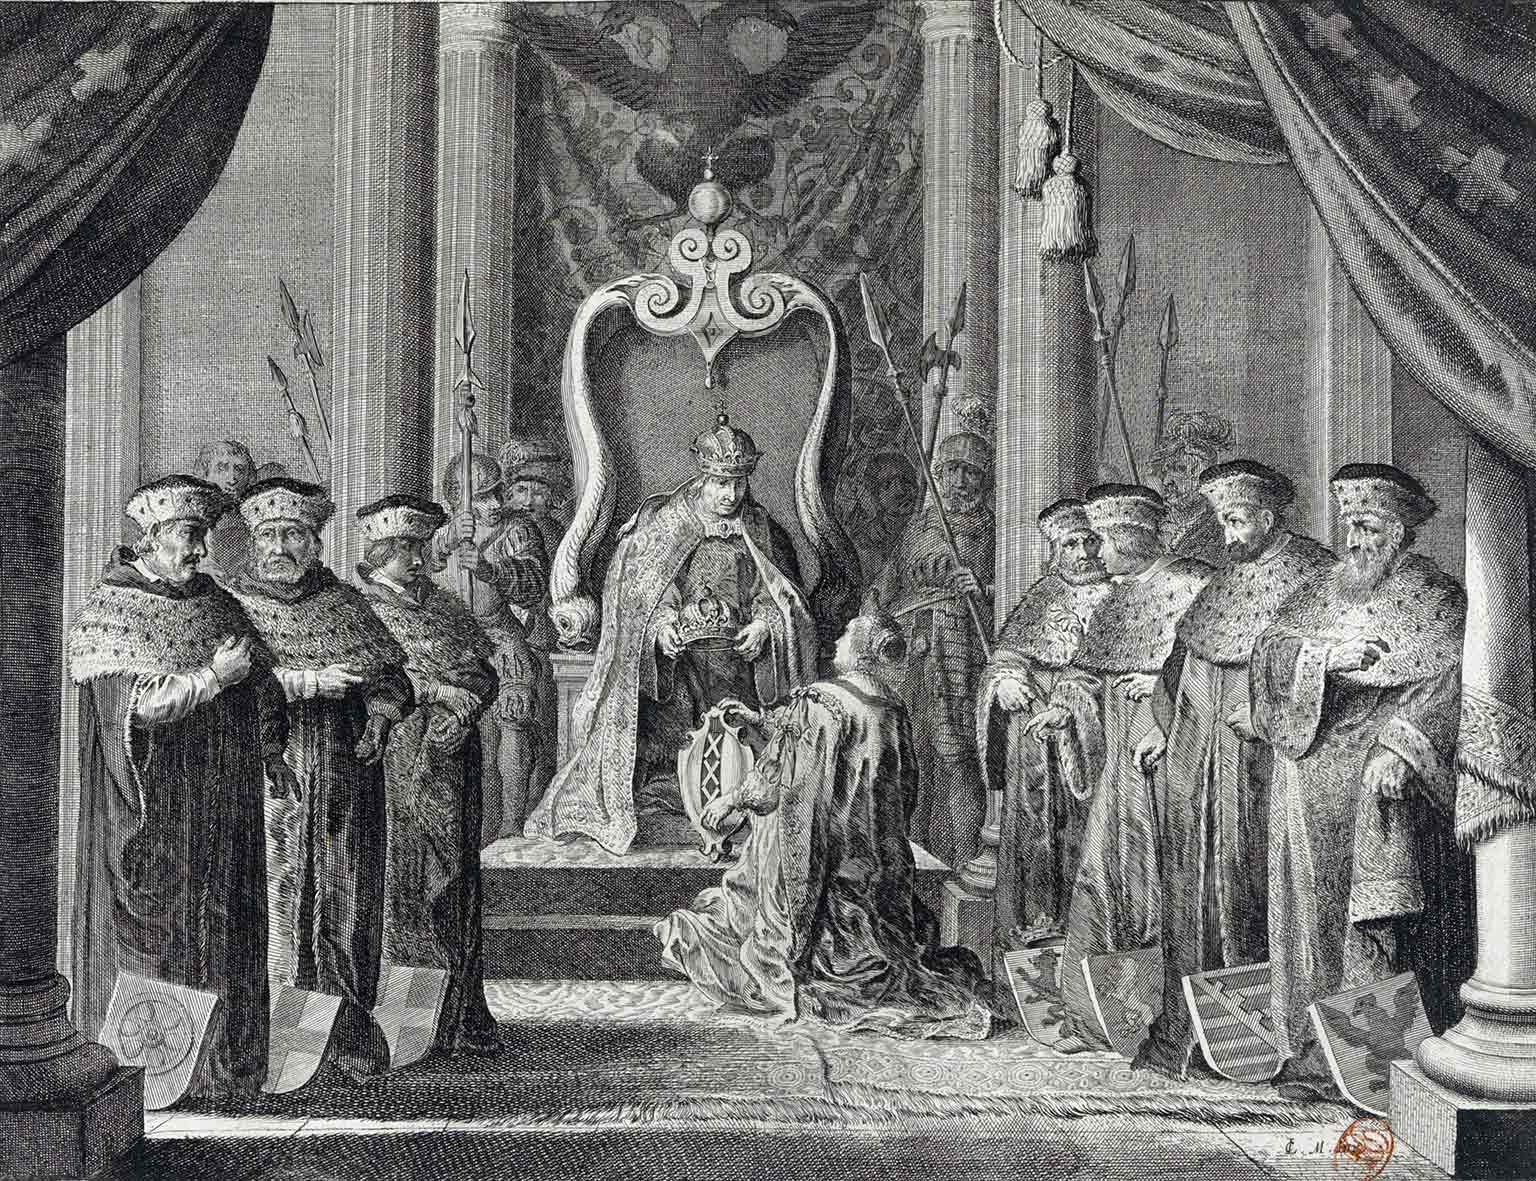 Emperor Maximilian I granting the imperial crown to Amsterdam